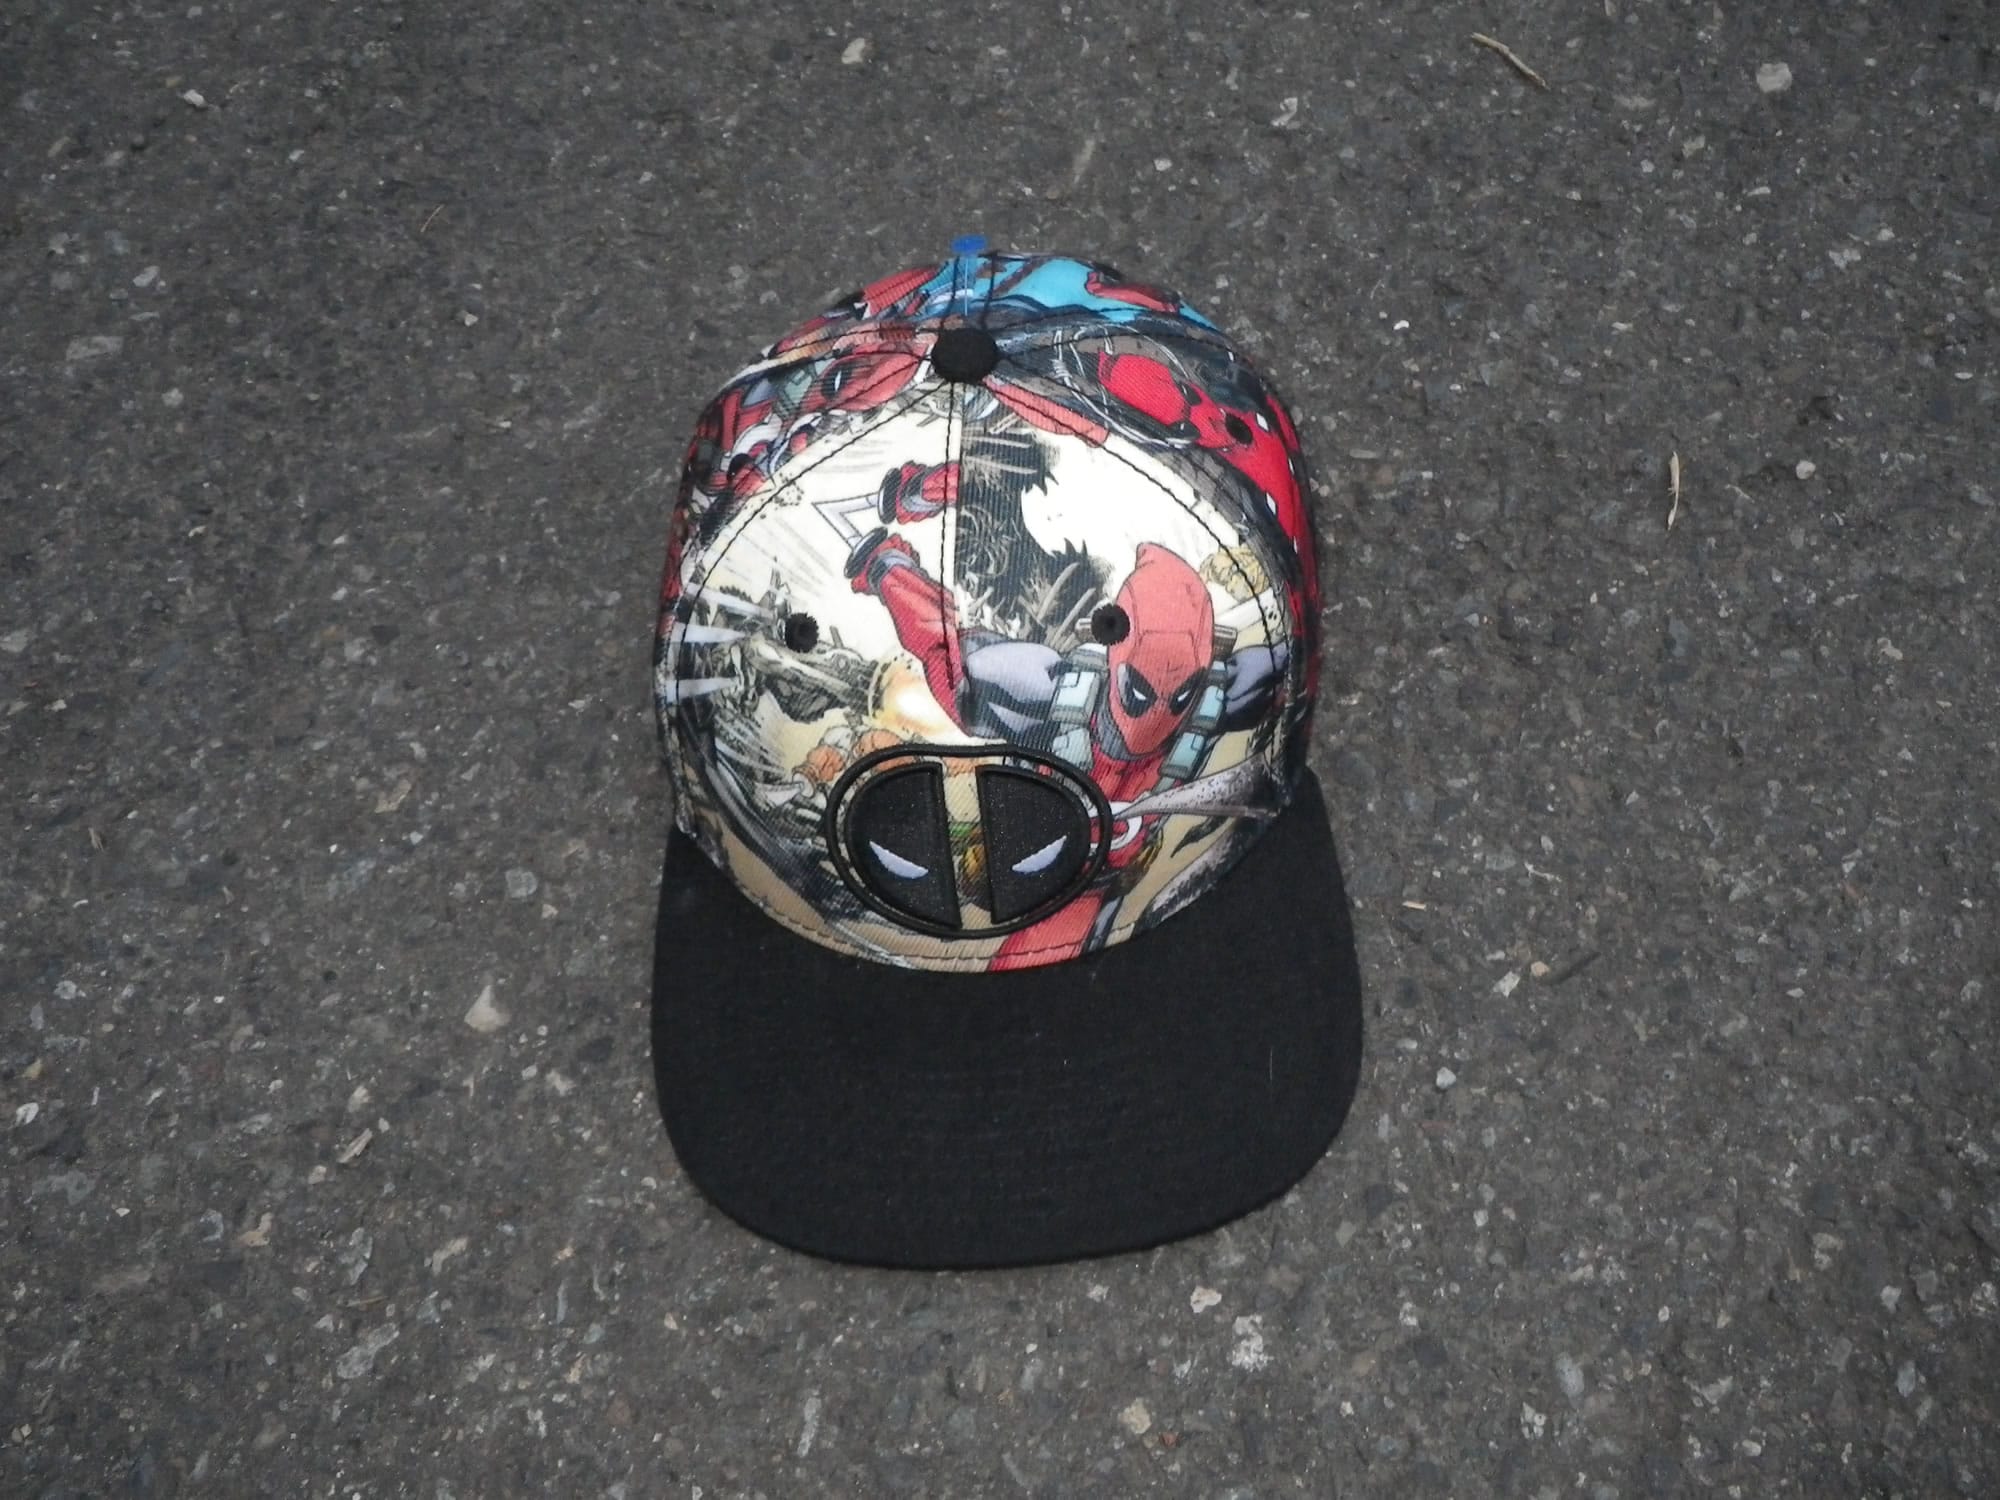 A baseball-style cap recovered from the scene of the Daybreak Youth Services fire on May 29, 2016.